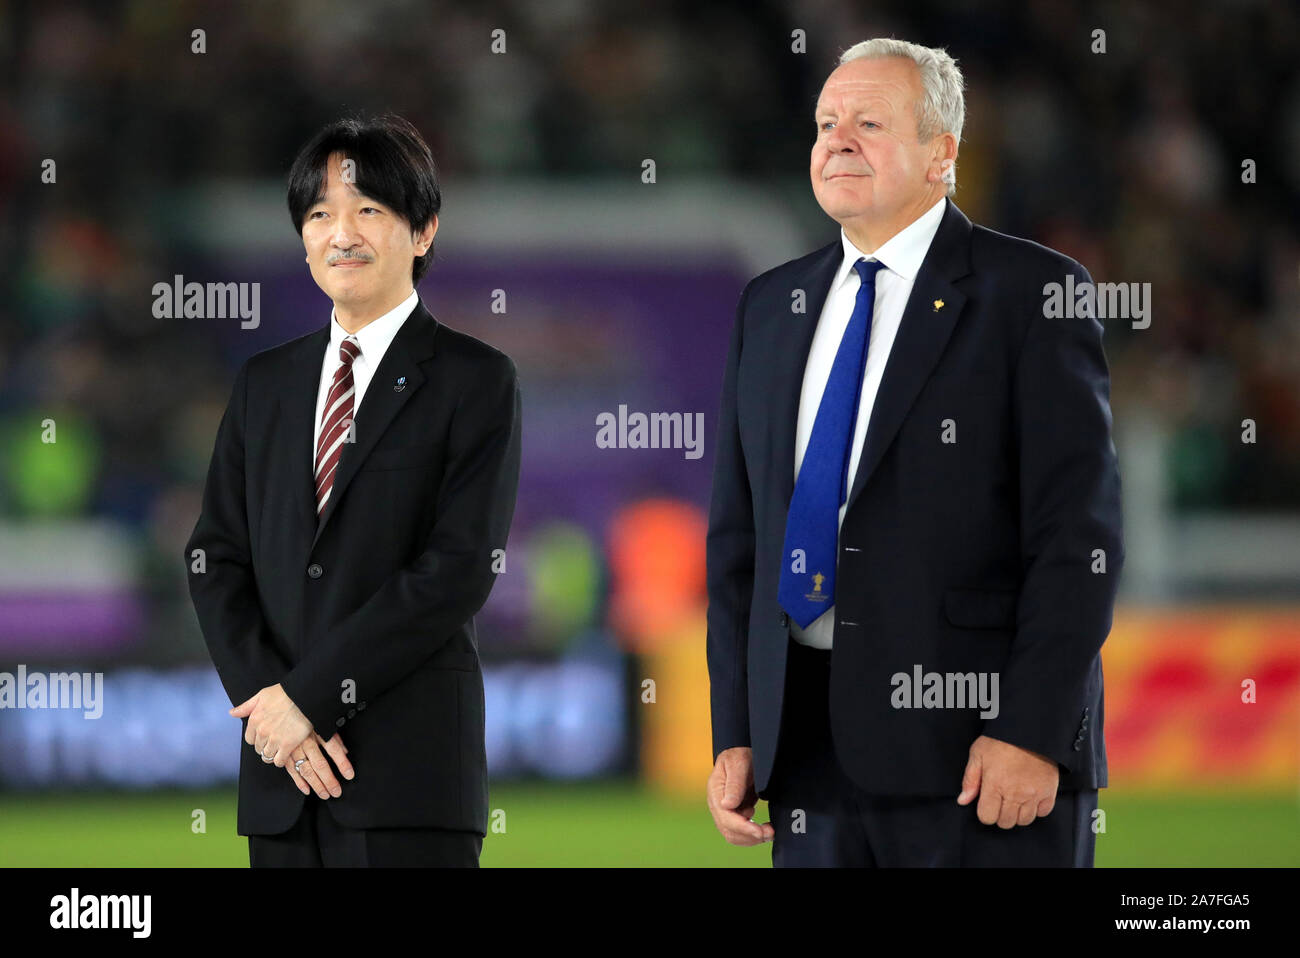 Japan's Crown Prince Akishino (left) and World Rugby Chairman Bill Beaumont during the 2019 Rugby World Cup final match at Yokohama Stadium. Stock Photo